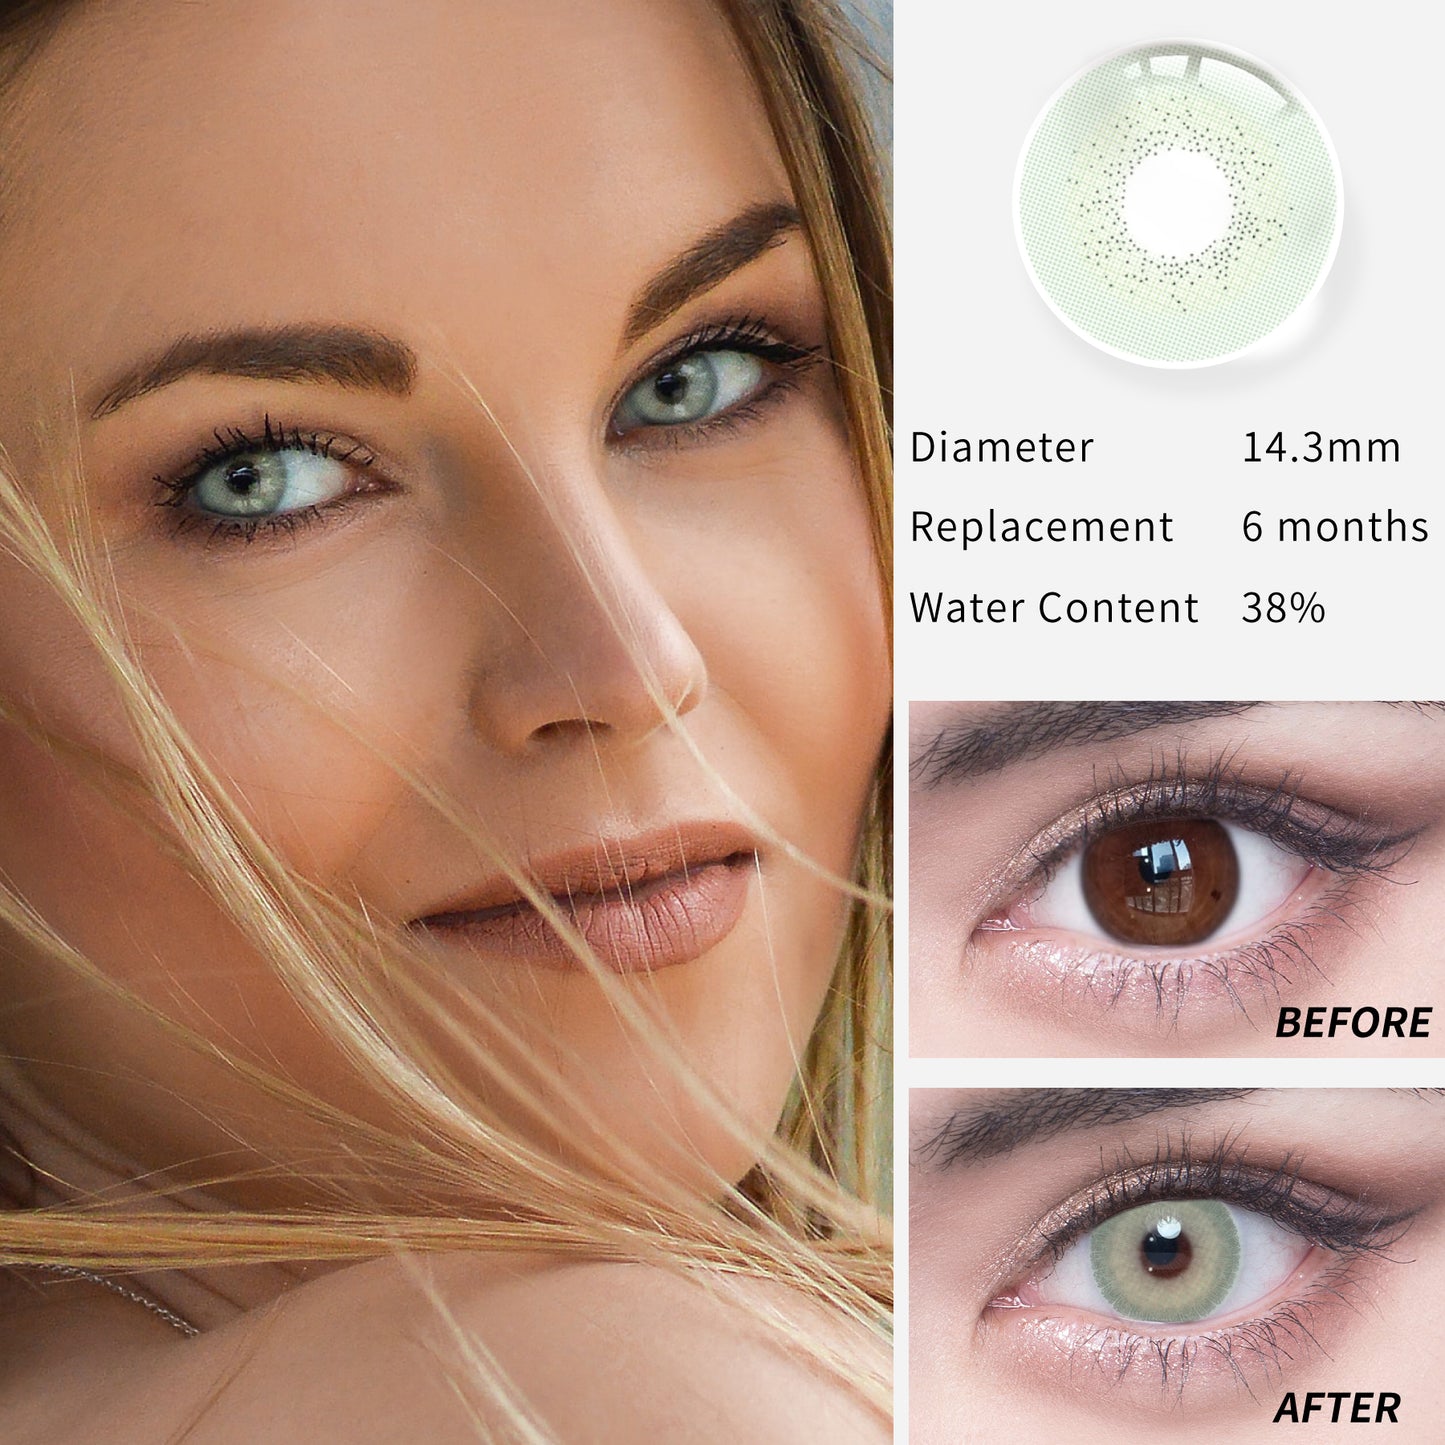 1Pcs FDA Certificate Eyes Colorful Contact Lenses - Nile light green